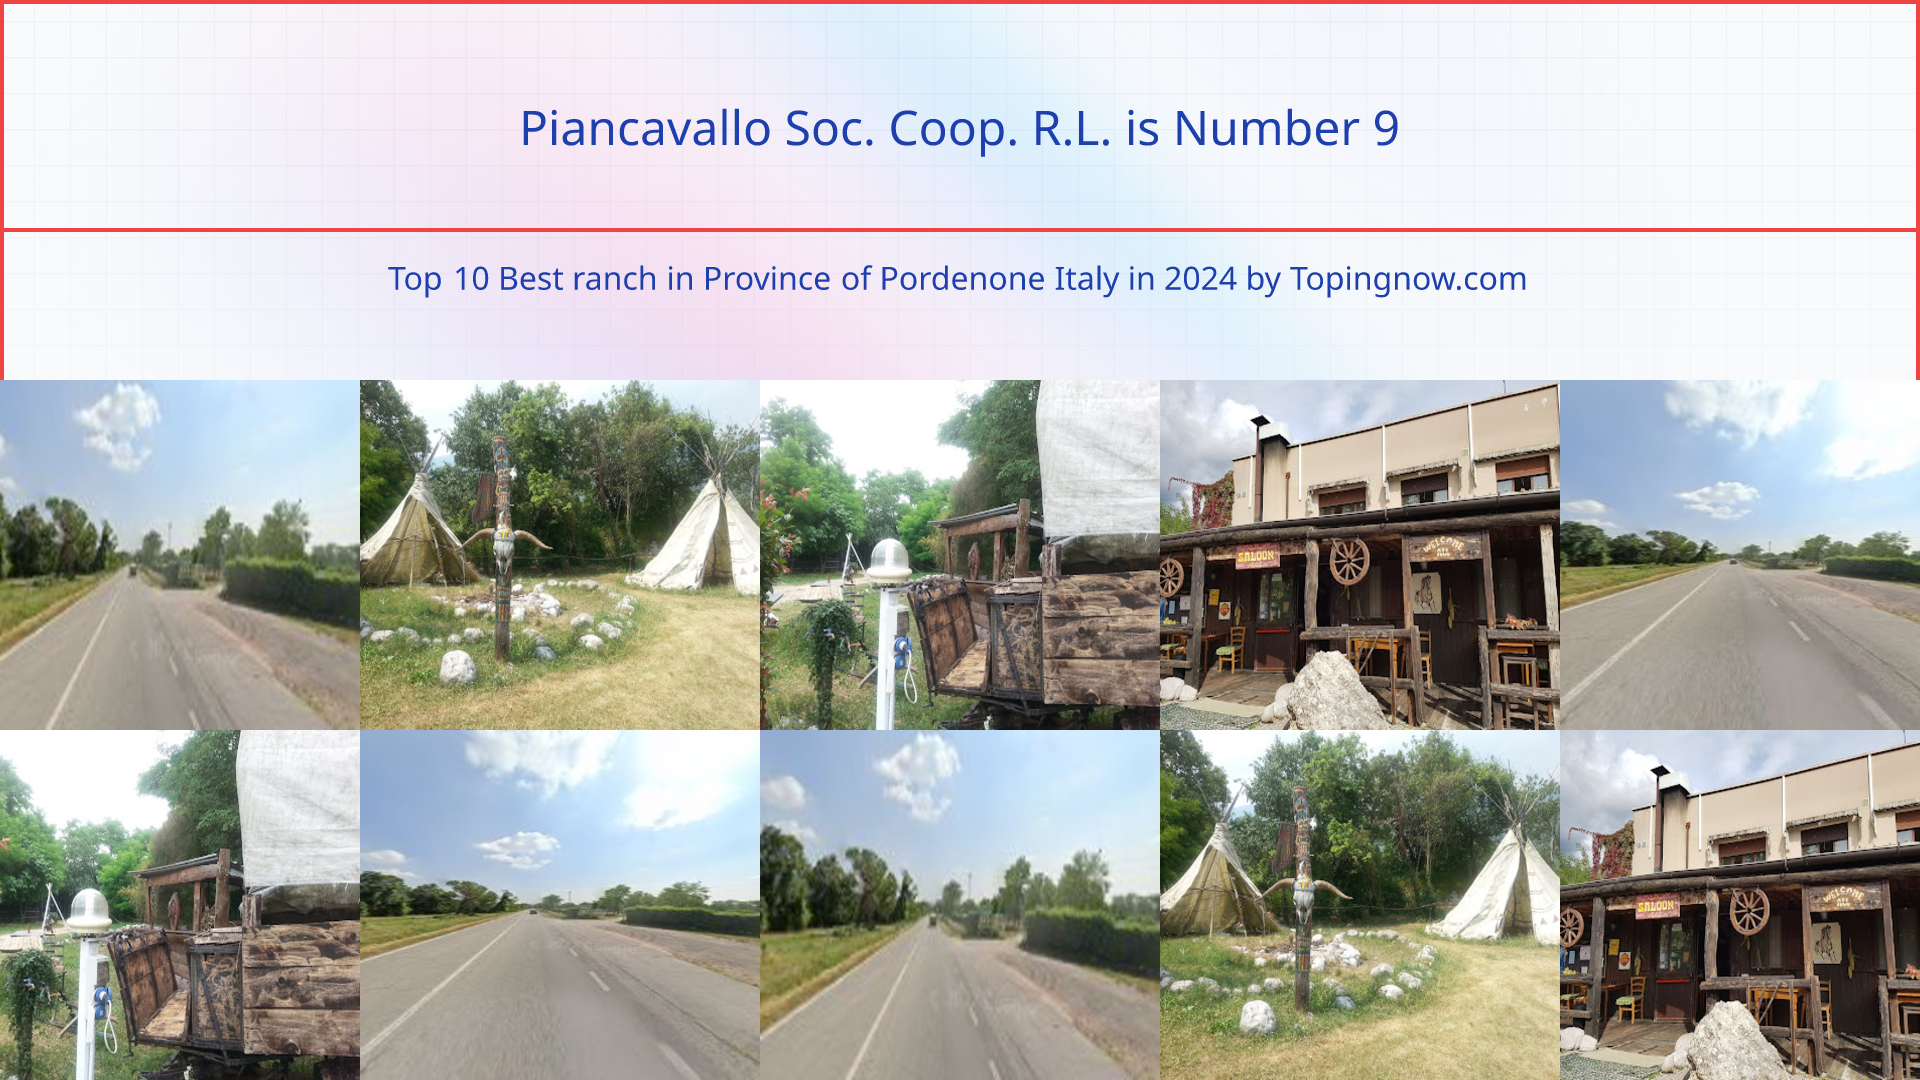 Piancavallo Soc. Coop. R.L.: Top 10 Best ranch in Province of Pordenone Italy in 2024